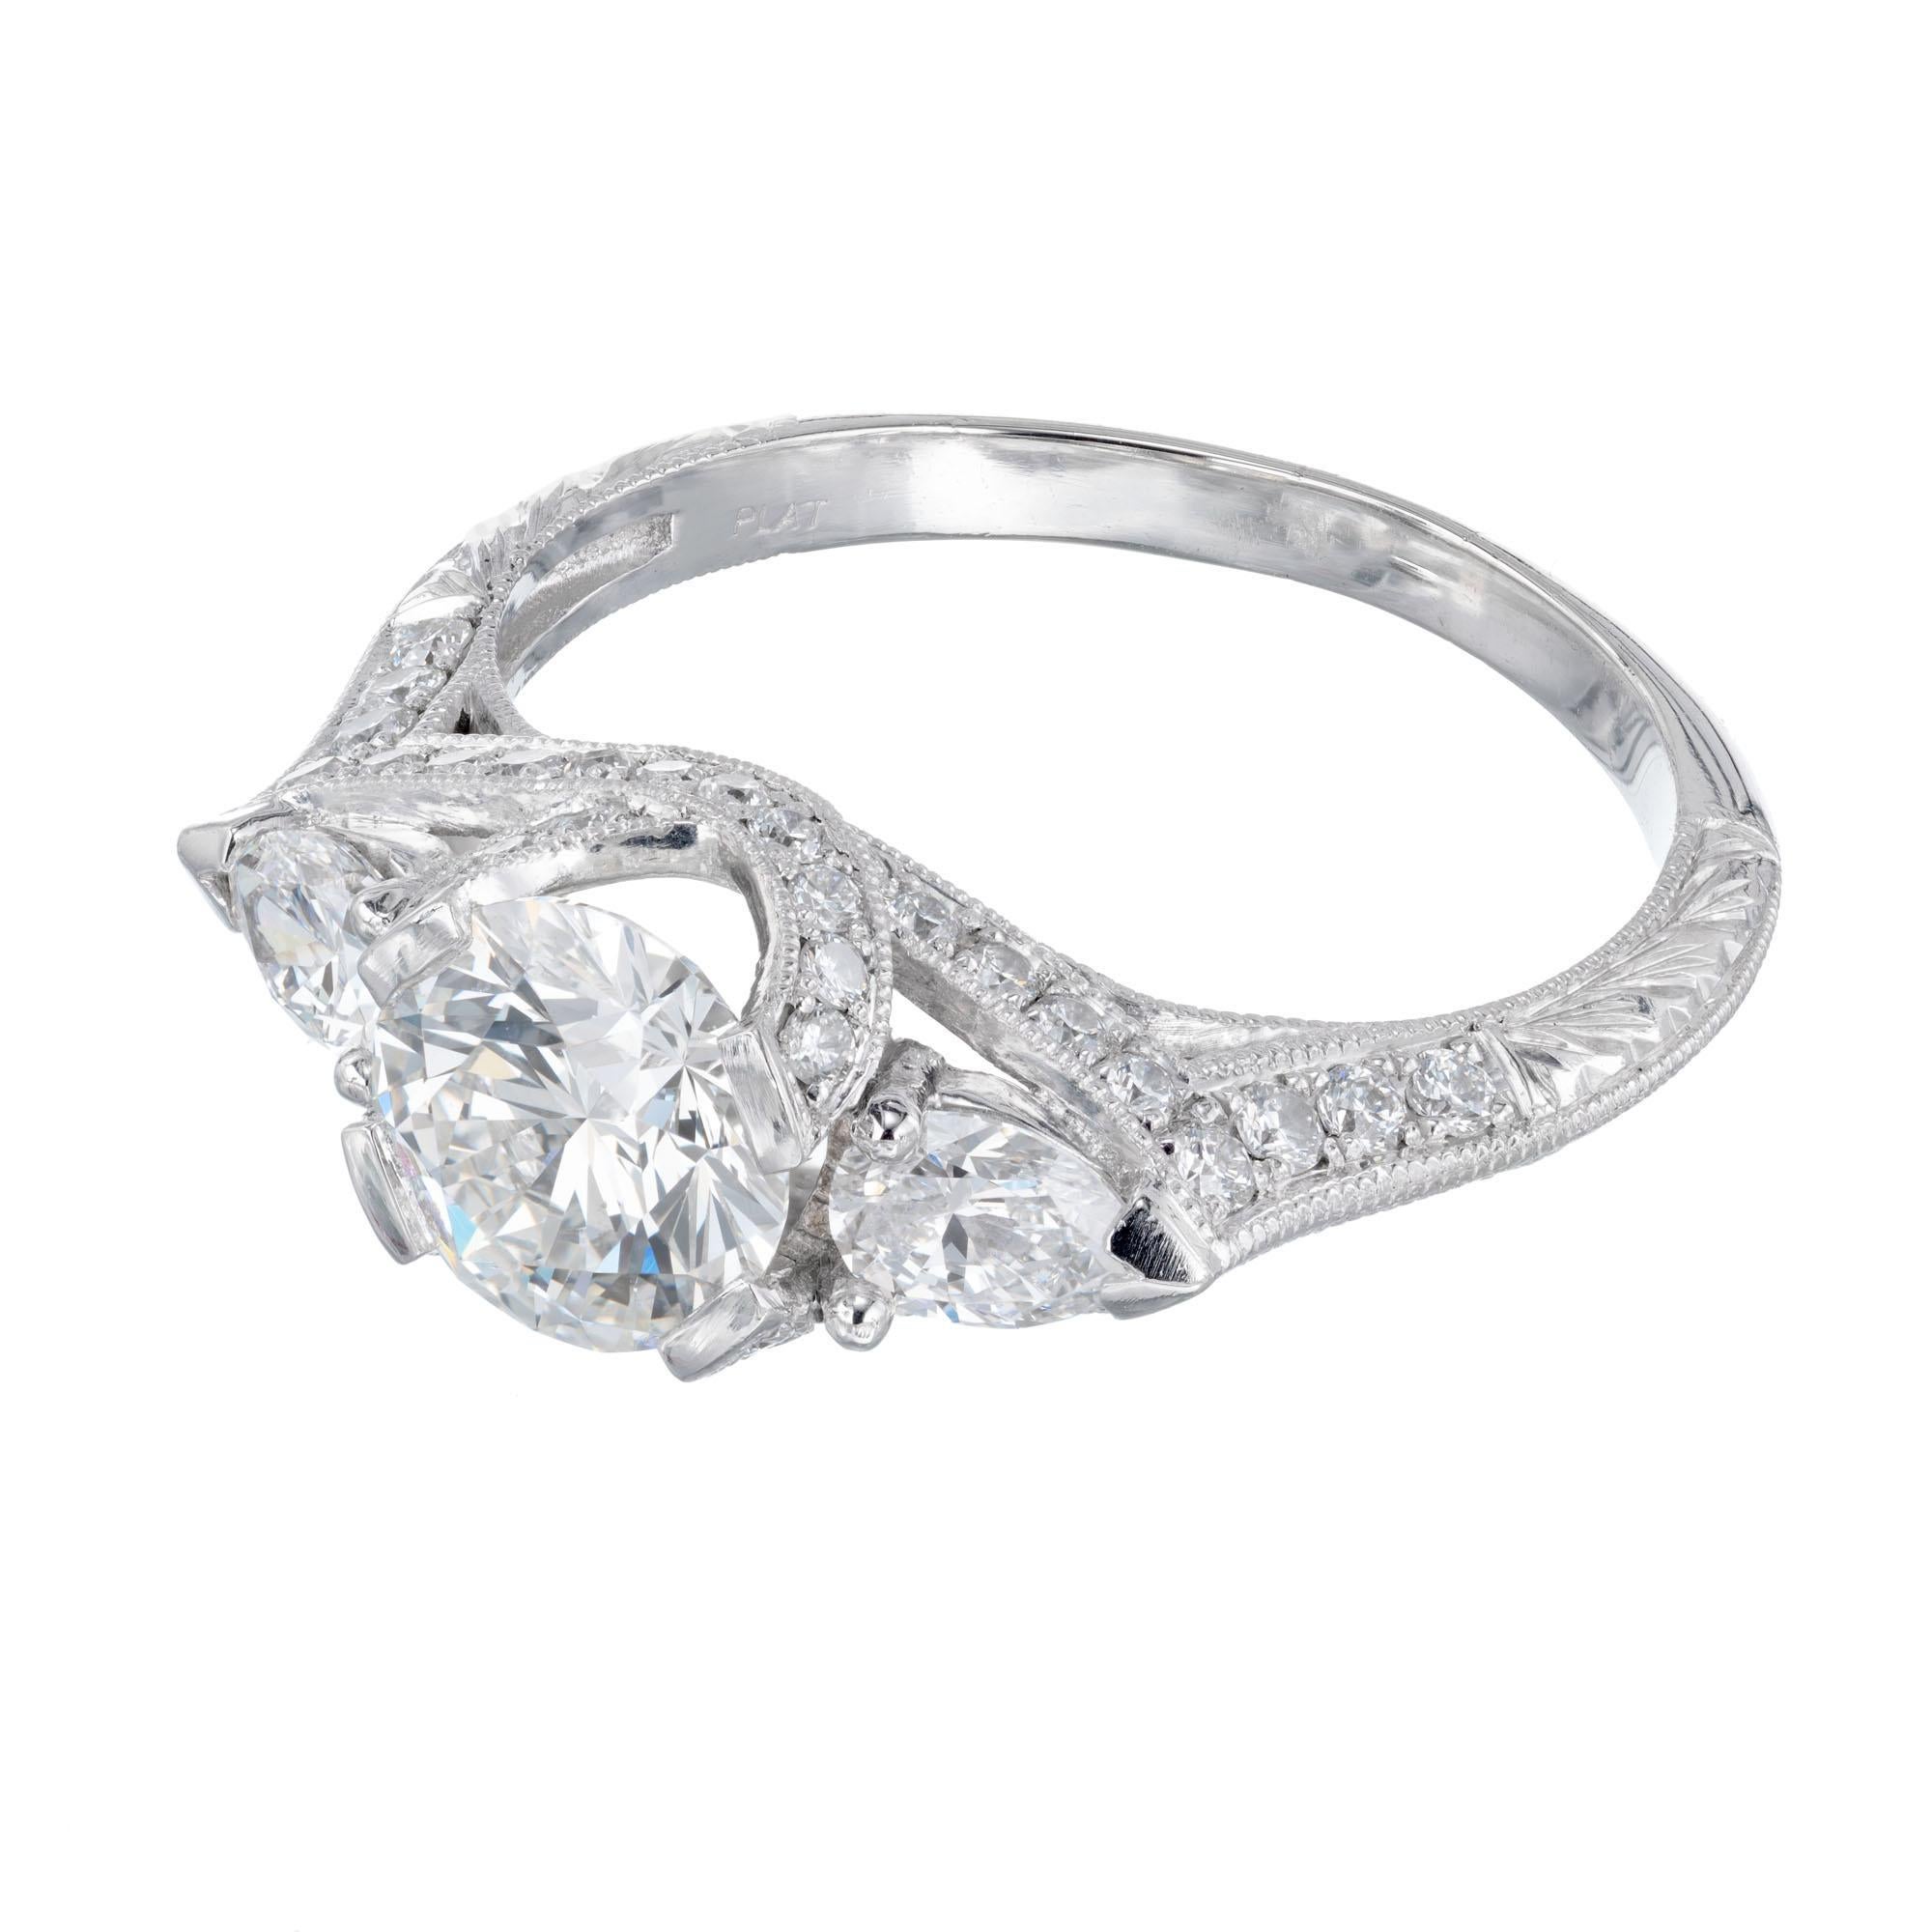 Peter Suchy diamond engagement ring. GIA certified round center stone with 2 pair shaped side diamonds and 50 round accent diamonds, in a platinum setting crafted in the Peter Suchy Workshop.  

1 round diamond, approx. total weight 1.05cts, G, SI1,